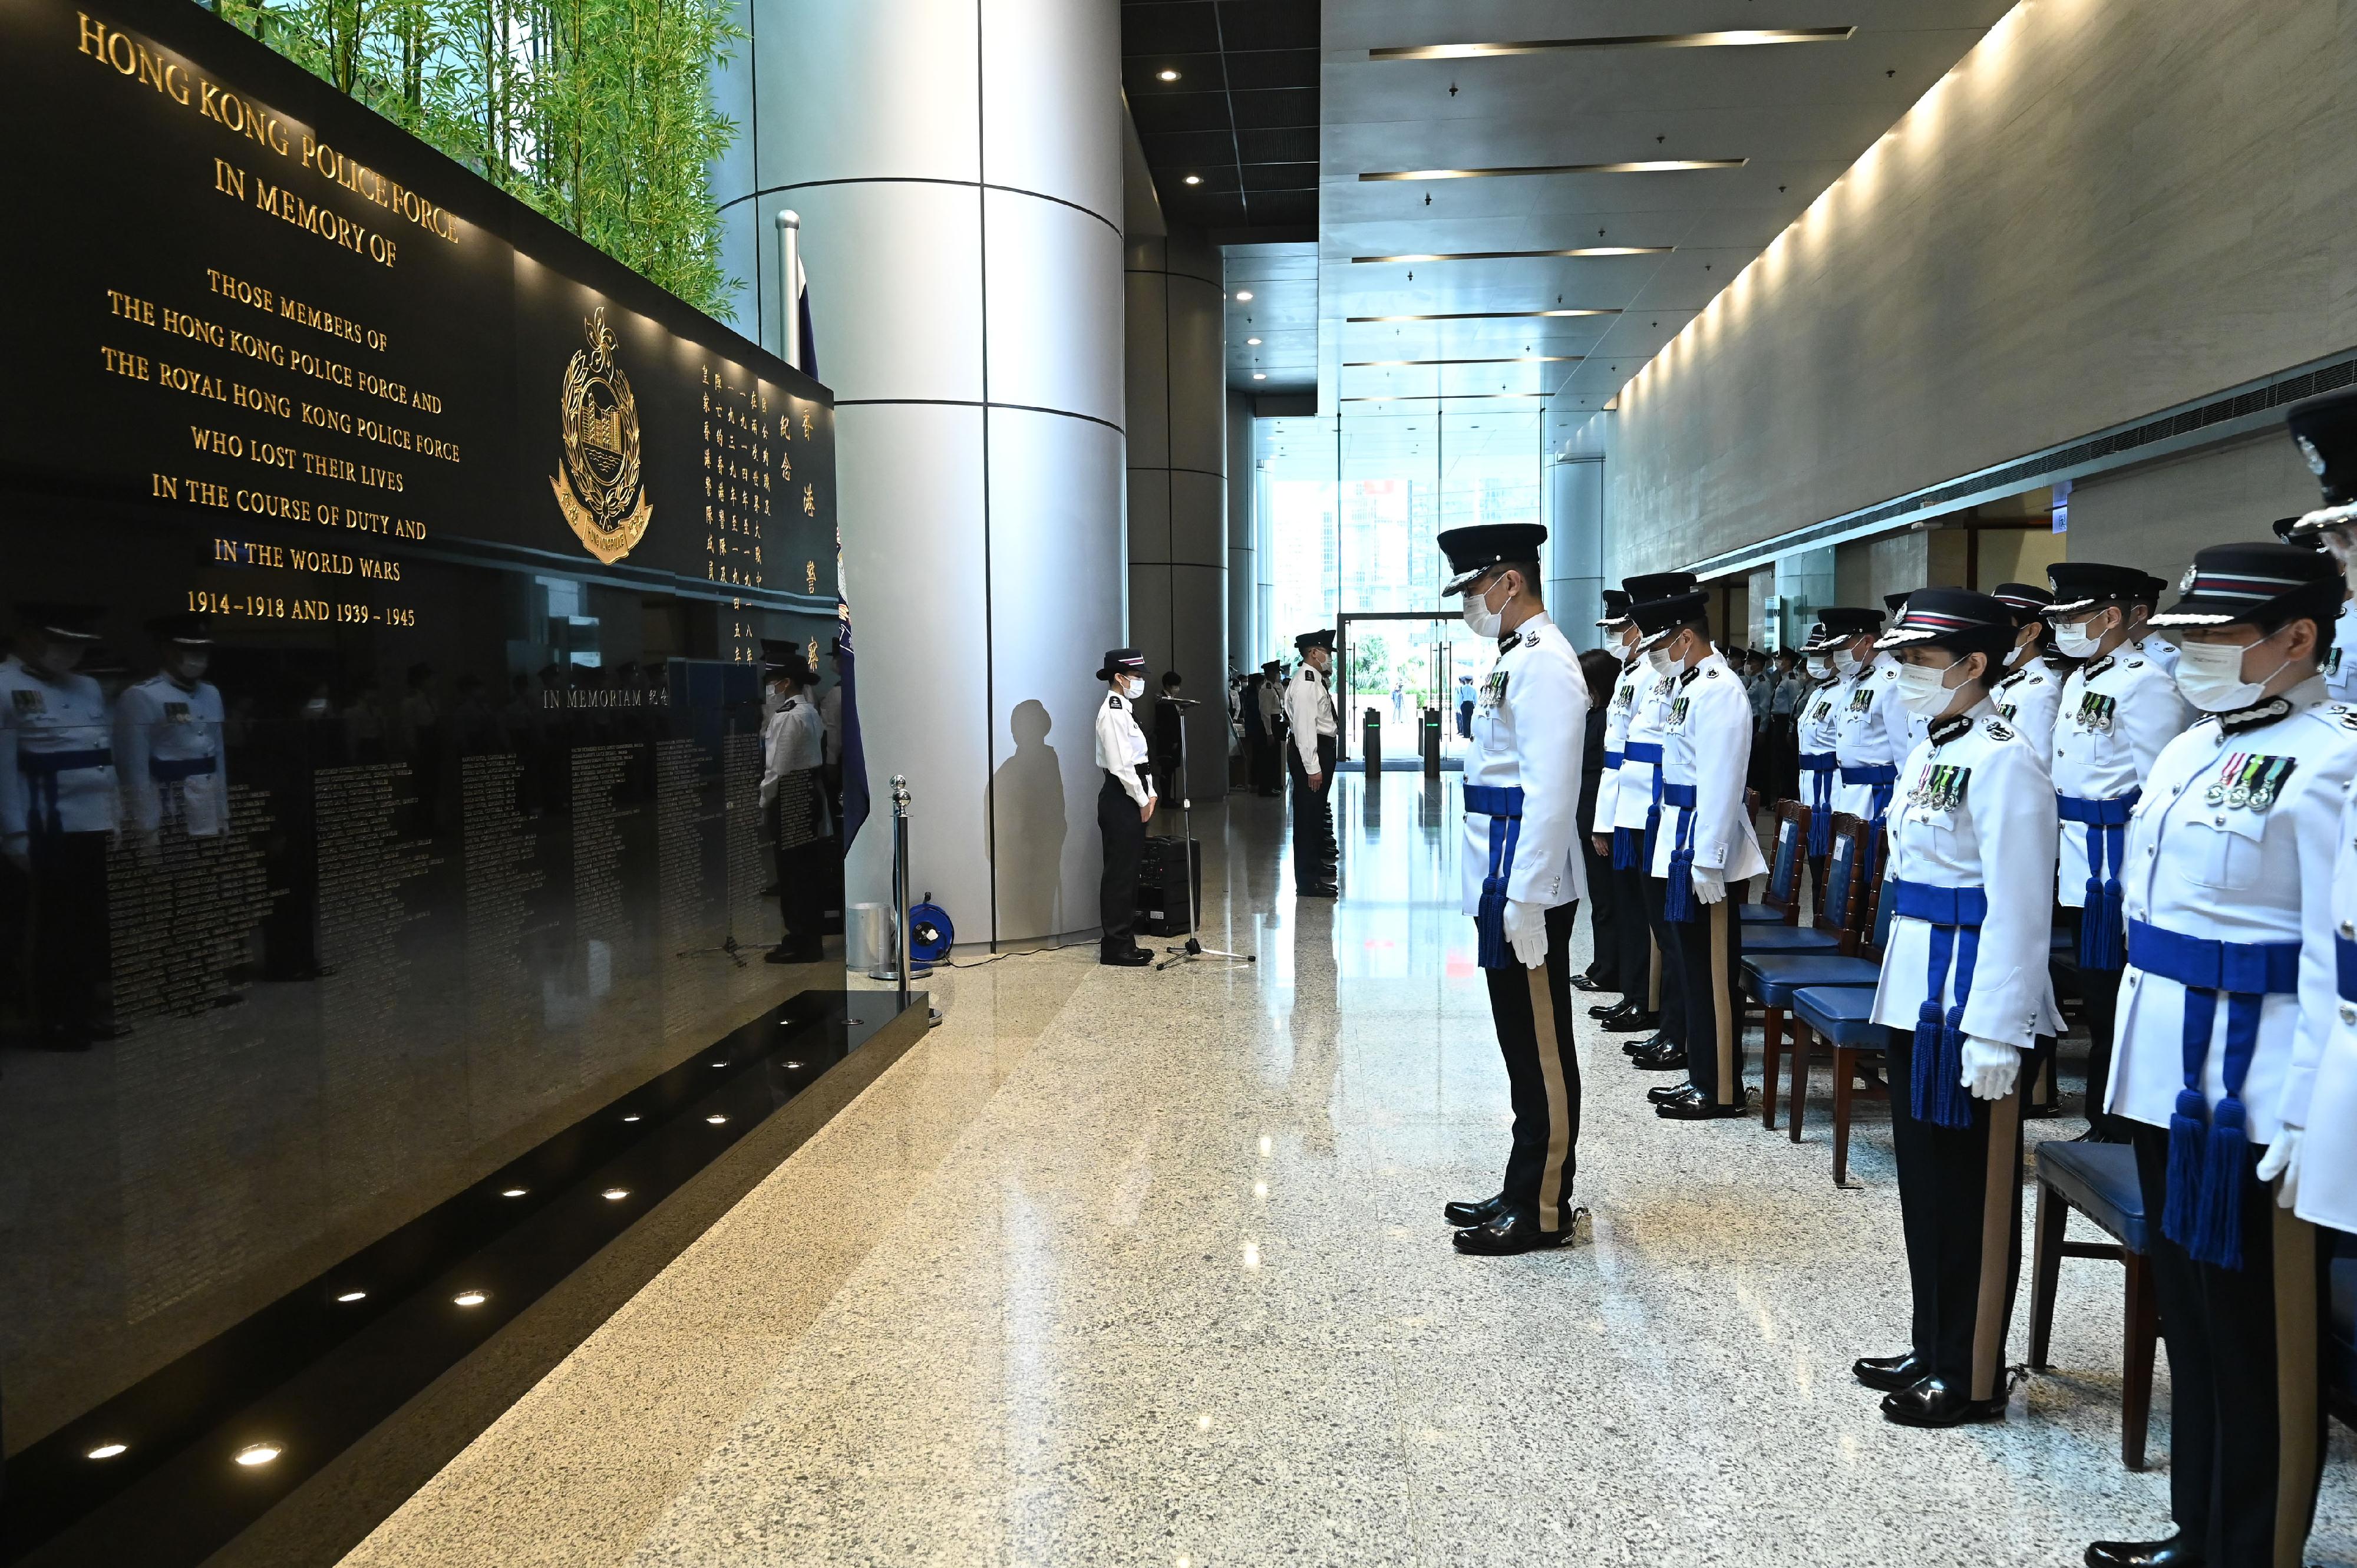 The Hong Kong Police Force holds a ceremony at the Police Headquarters this morning (November 11) to pay tribute to members of the Hong Kong Police Force and Hong Kong Auxiliary Police Force who have given their lives in the line of duty. Photo shows the Commissioner of Police, Mr Siu Chak-yee, and the Commissioner Rank Officers attending the ceremony in front of the new Force Memorial Wall at the 3/F foyer of Arsenal House.